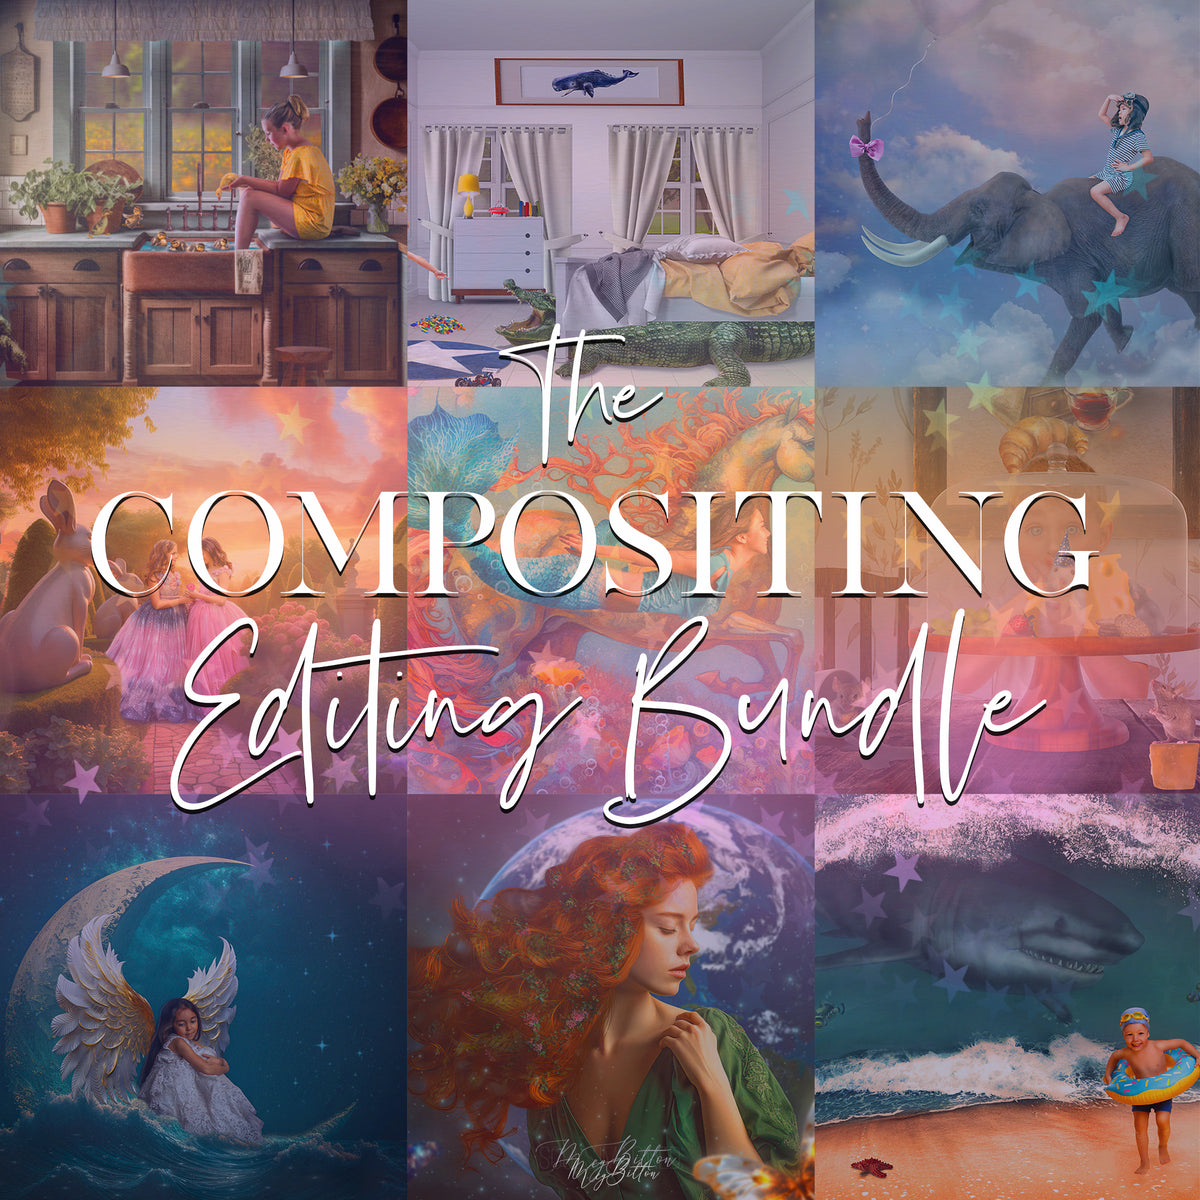 The Compositing Editing Bundle